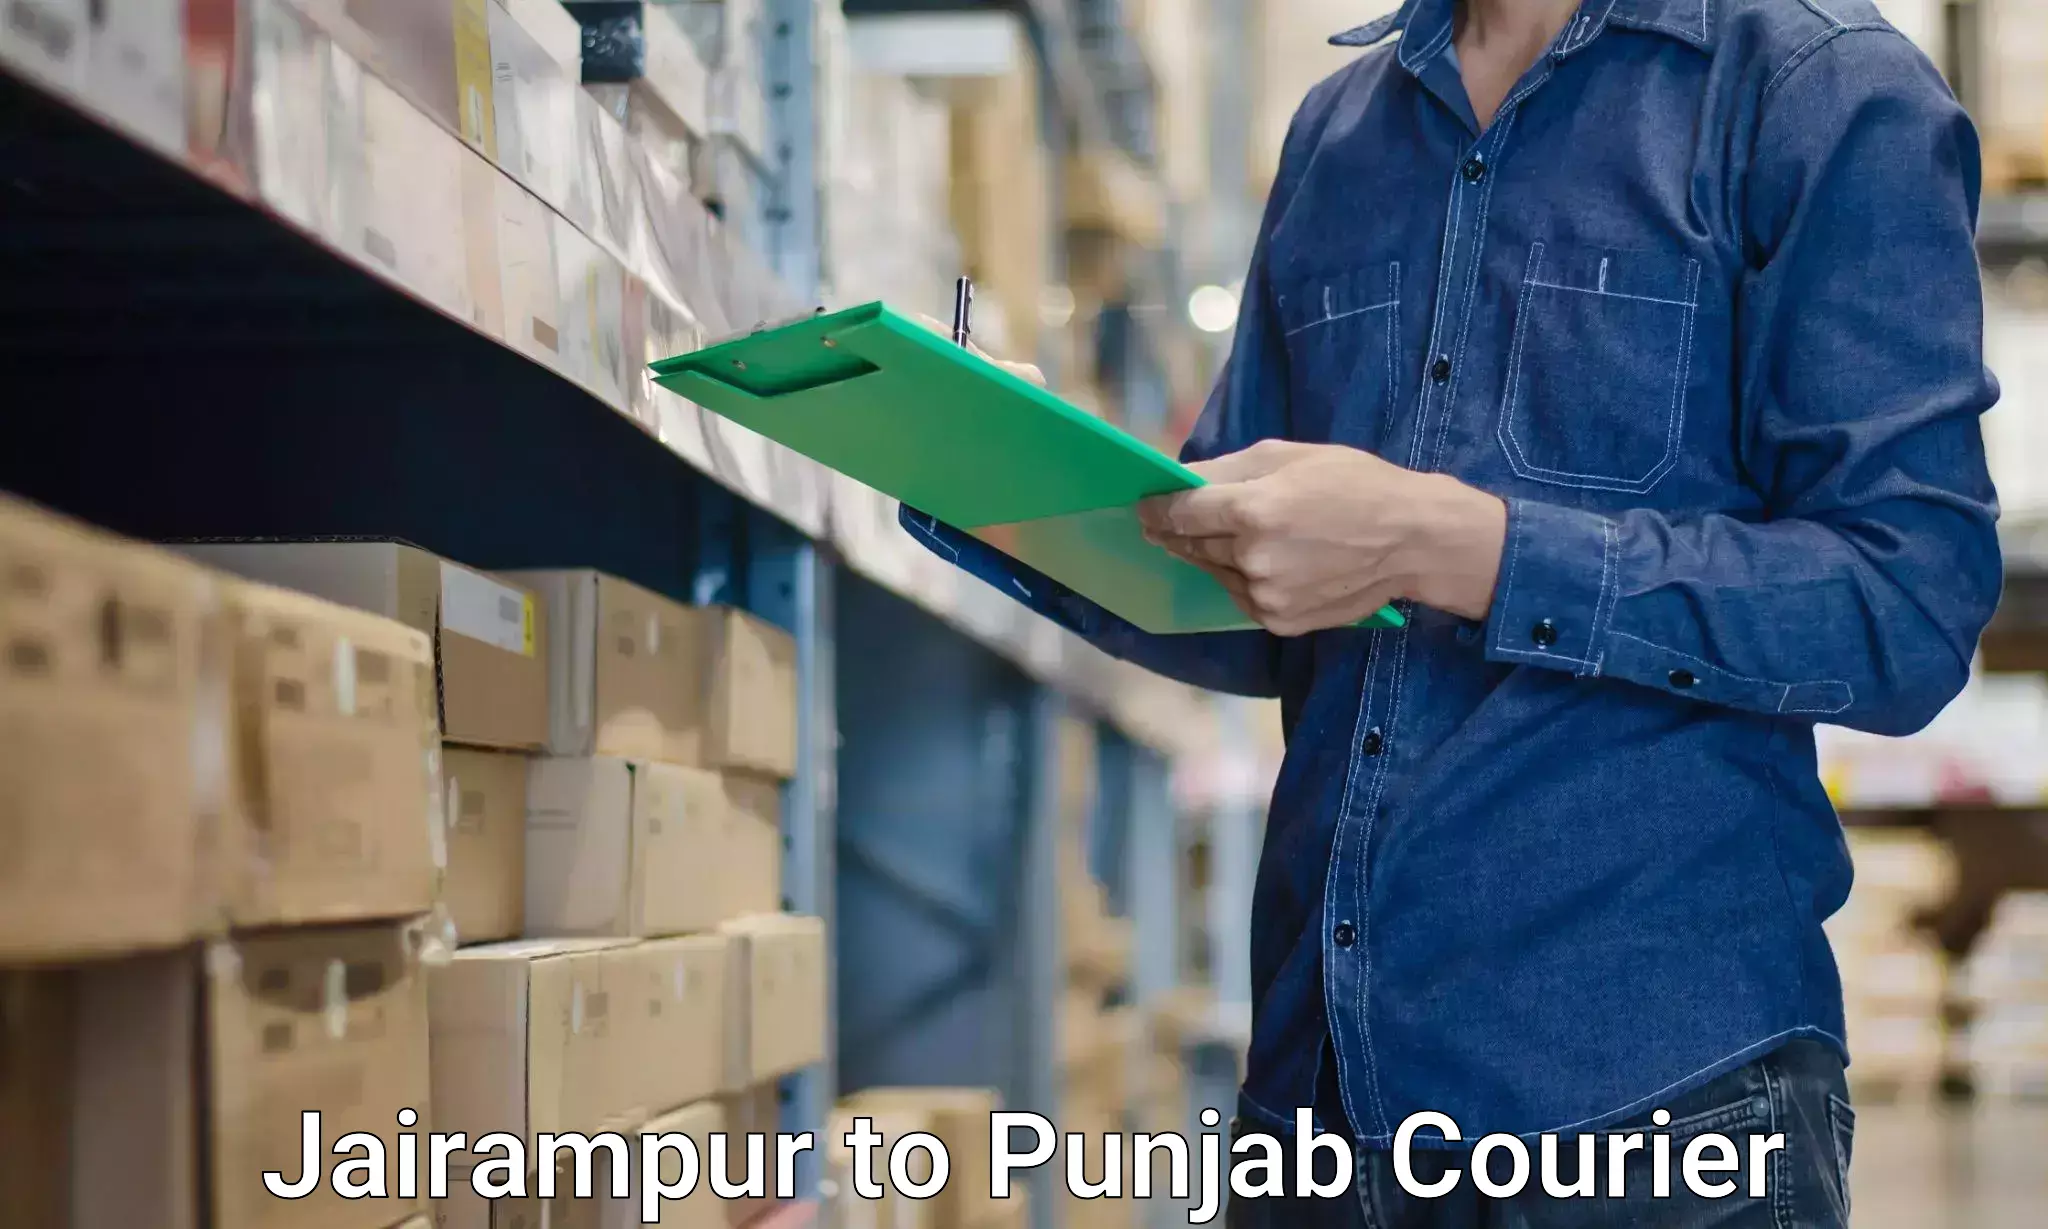 Quality relocation assistance in Jairampur to Punjab